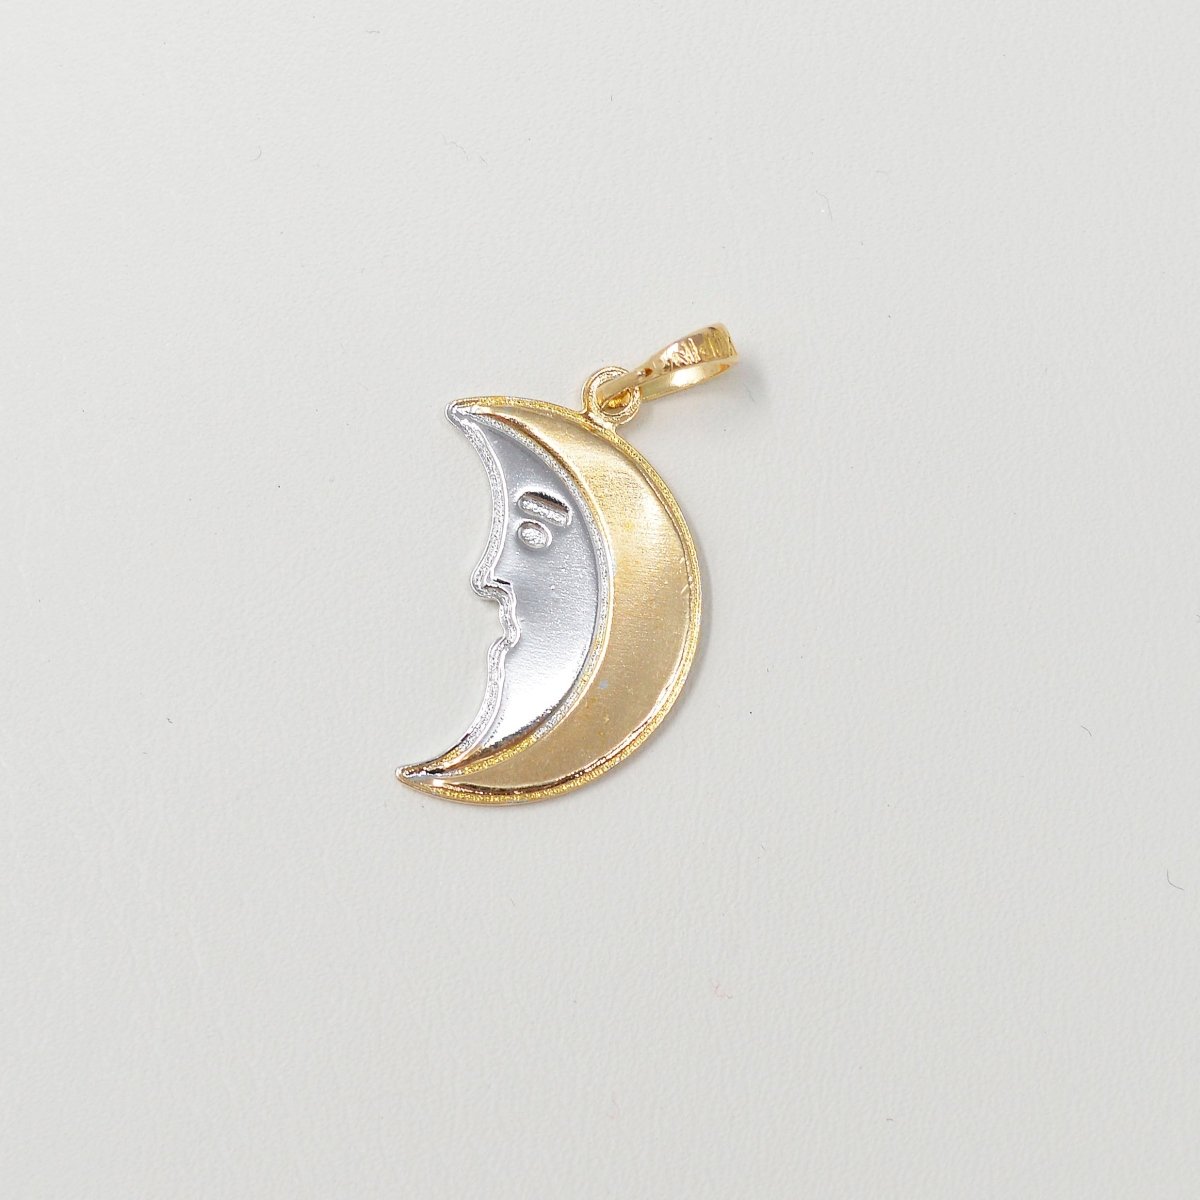 DEL- 1pc 27x13mm Wholesale 14K Gold Filled Face in the Moon Pendant Charm, Two Tone Gold and Silver Crescent Moon Pendant for Necklace Bracelet Anklet Making - DLUXCA